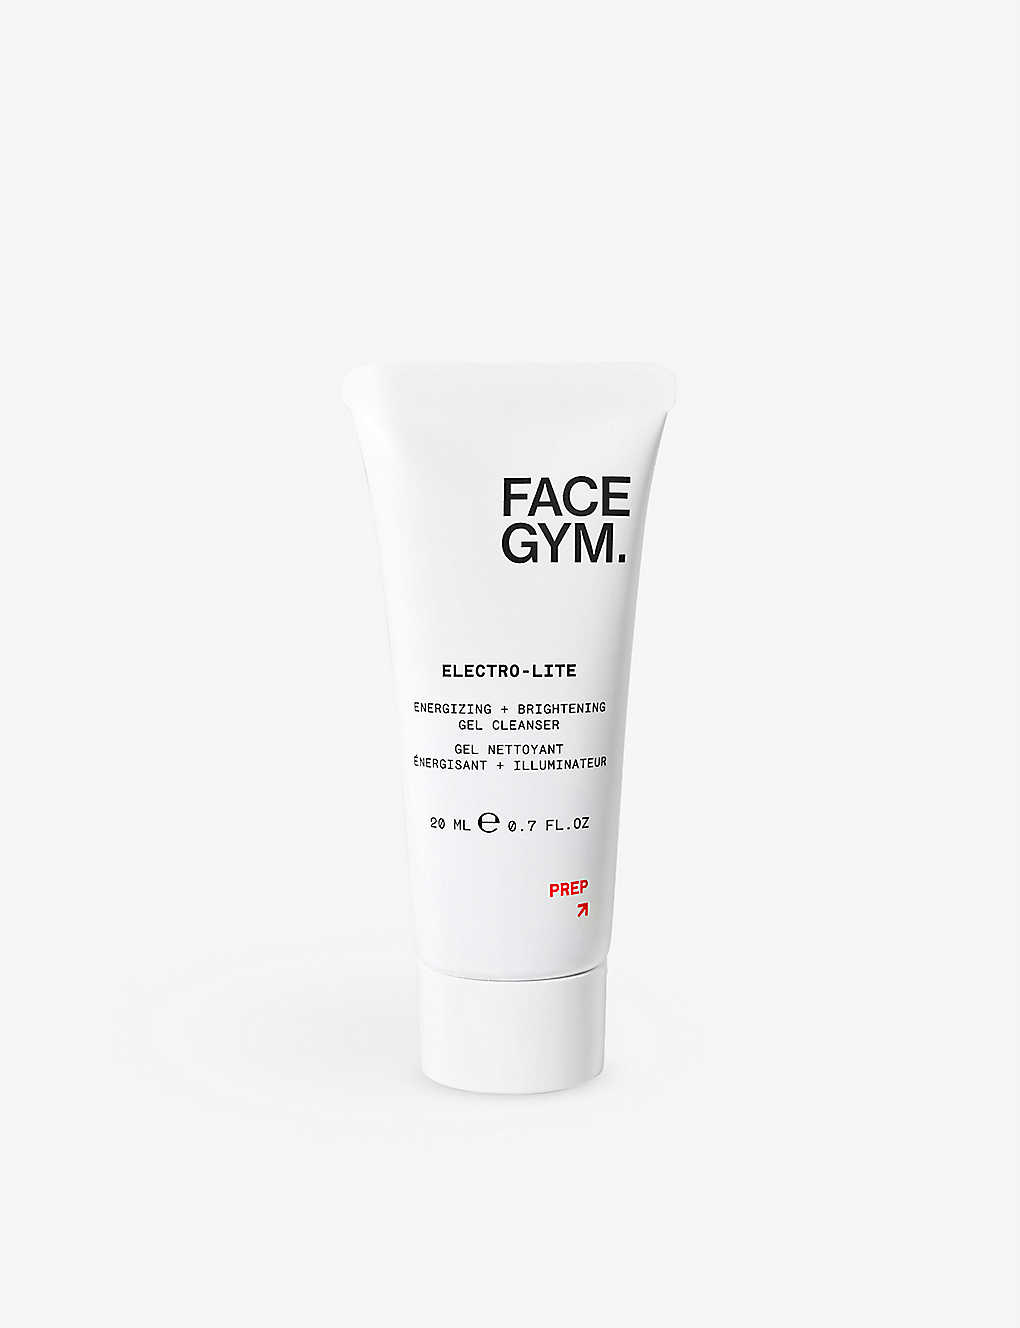 Facegym Electro-lite Energizing + Brightening Gel Cleanser